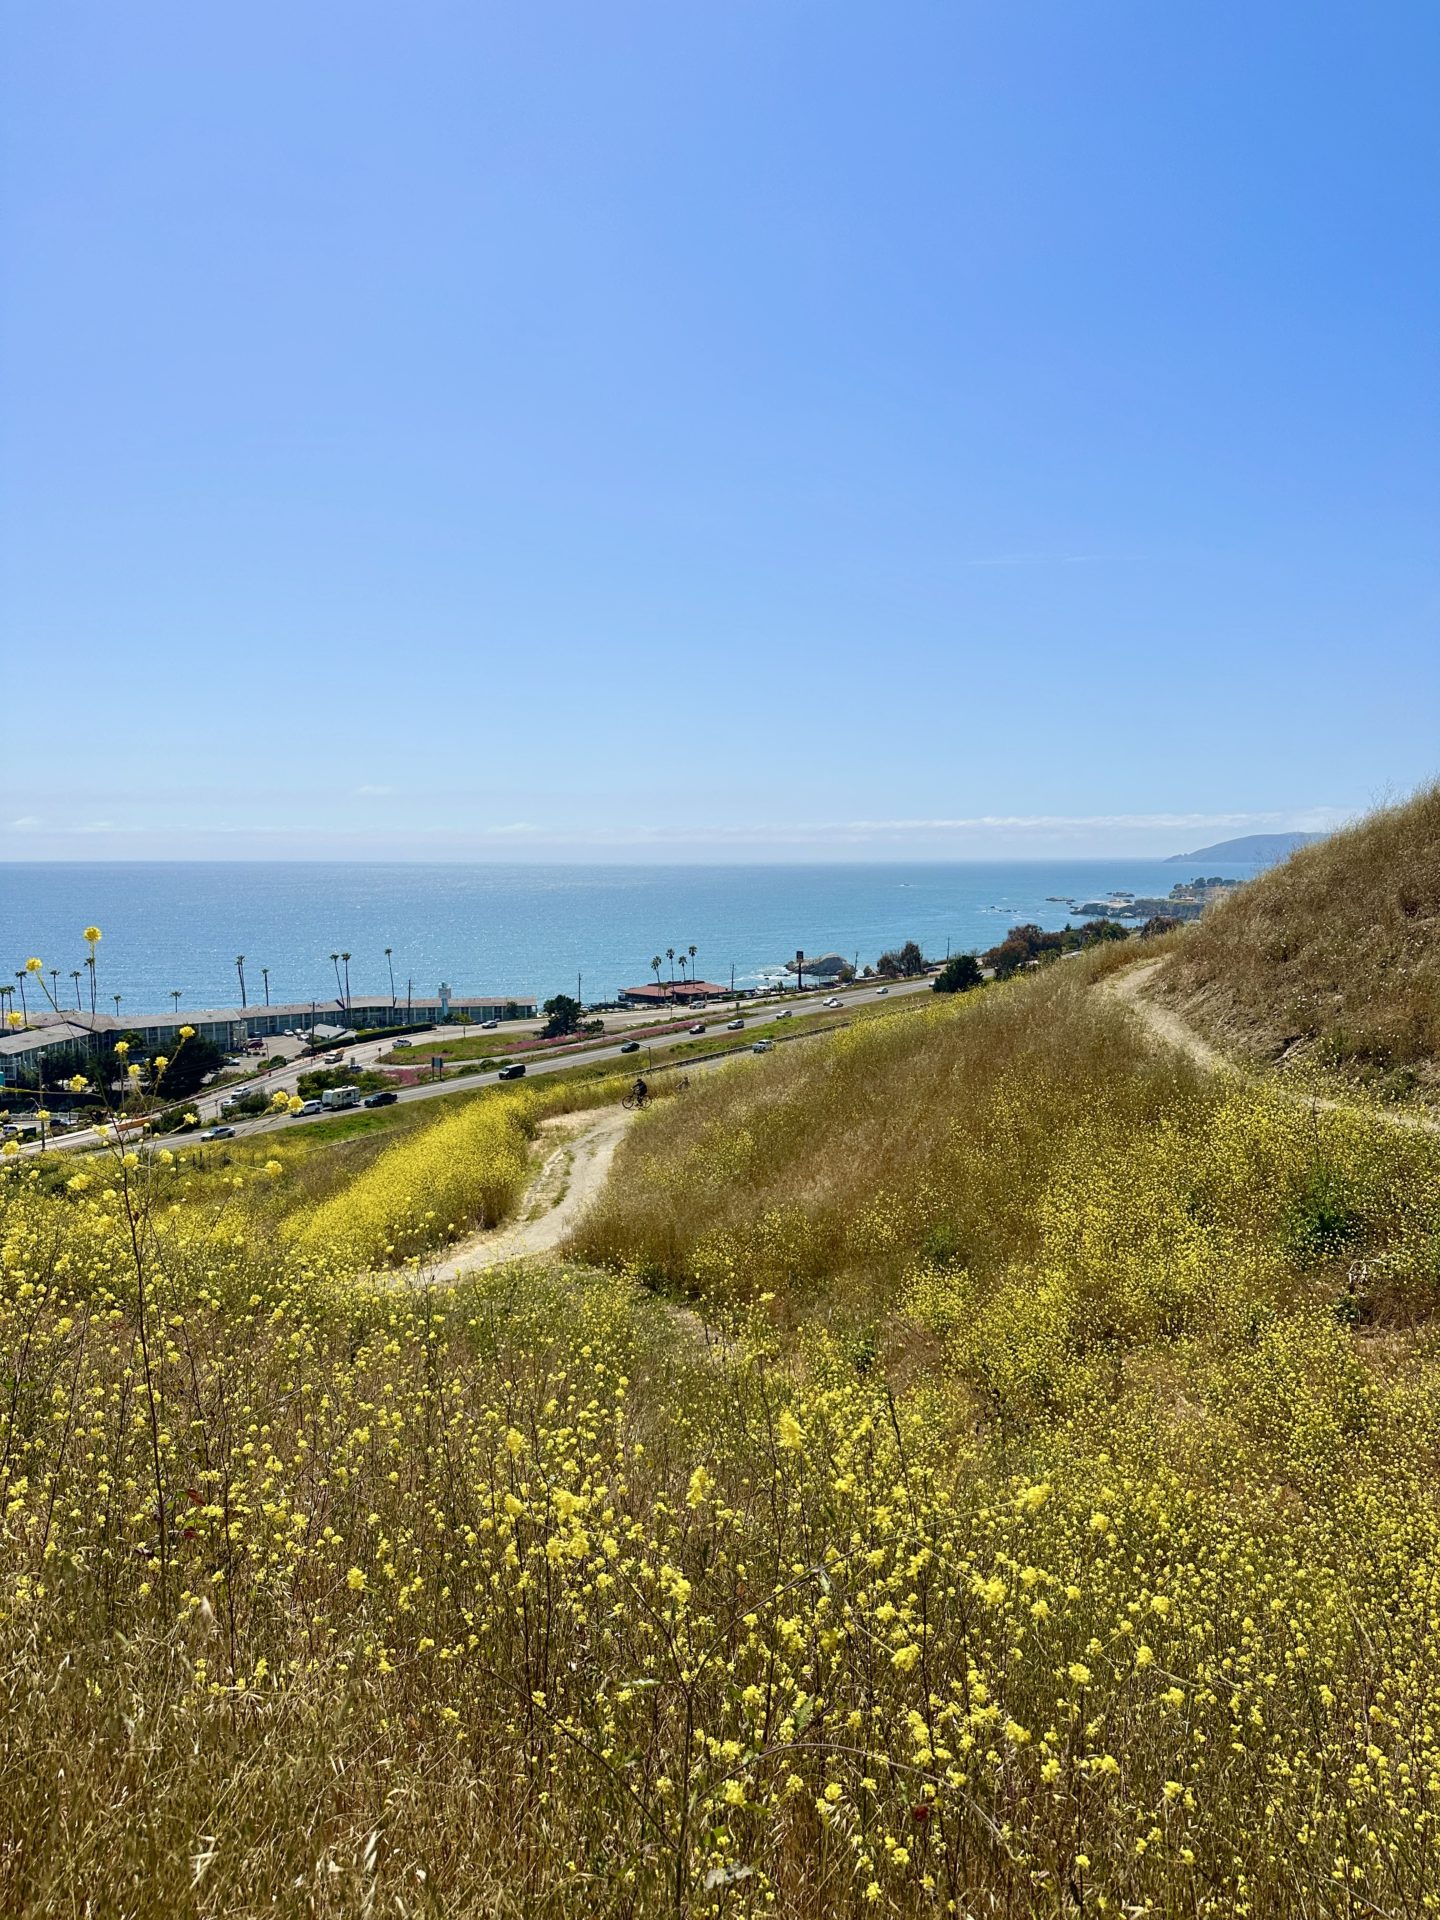 Views of Pismo Beach from Pismo Preserve